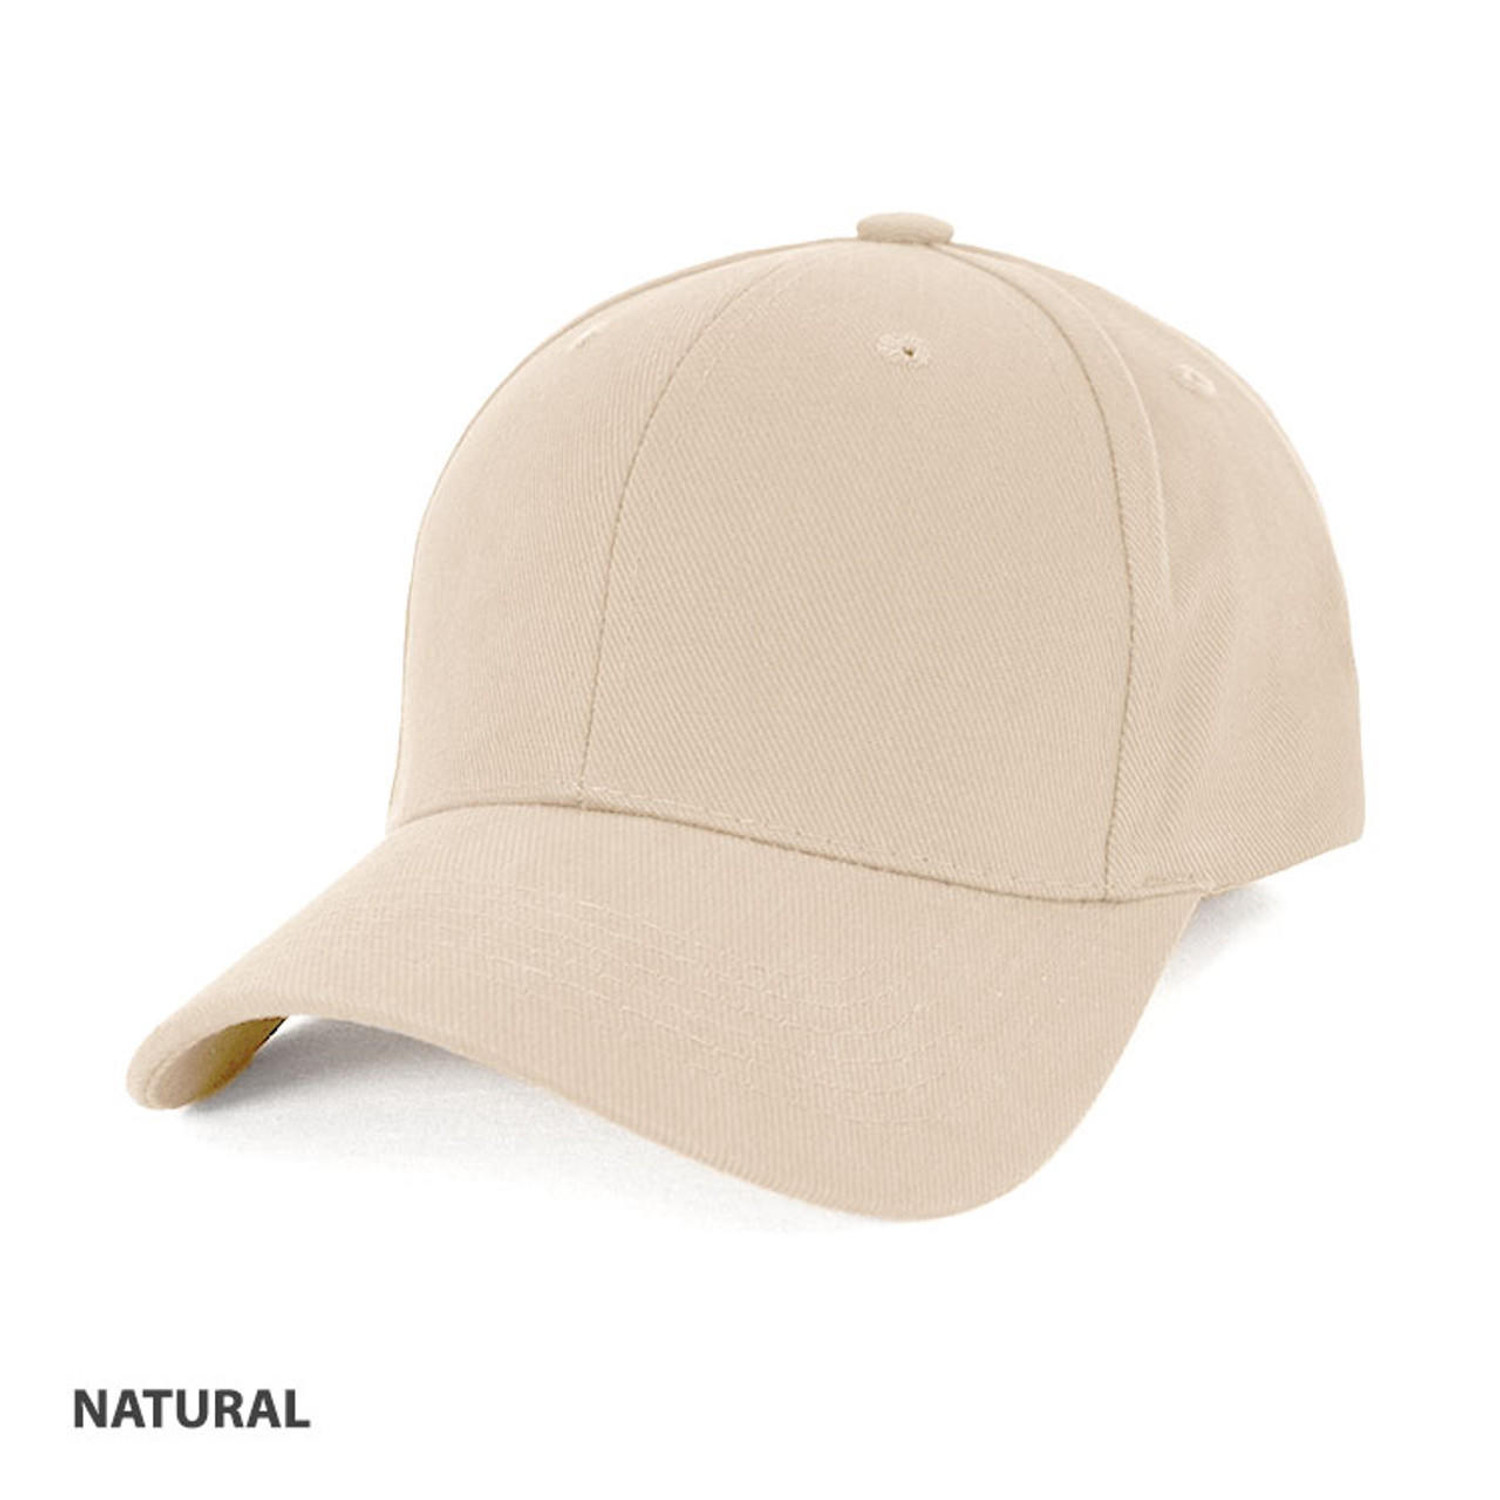  FREE EMBROIDERY - Heavy Brushed Cotton Cap in Natural (Buy 20+) 